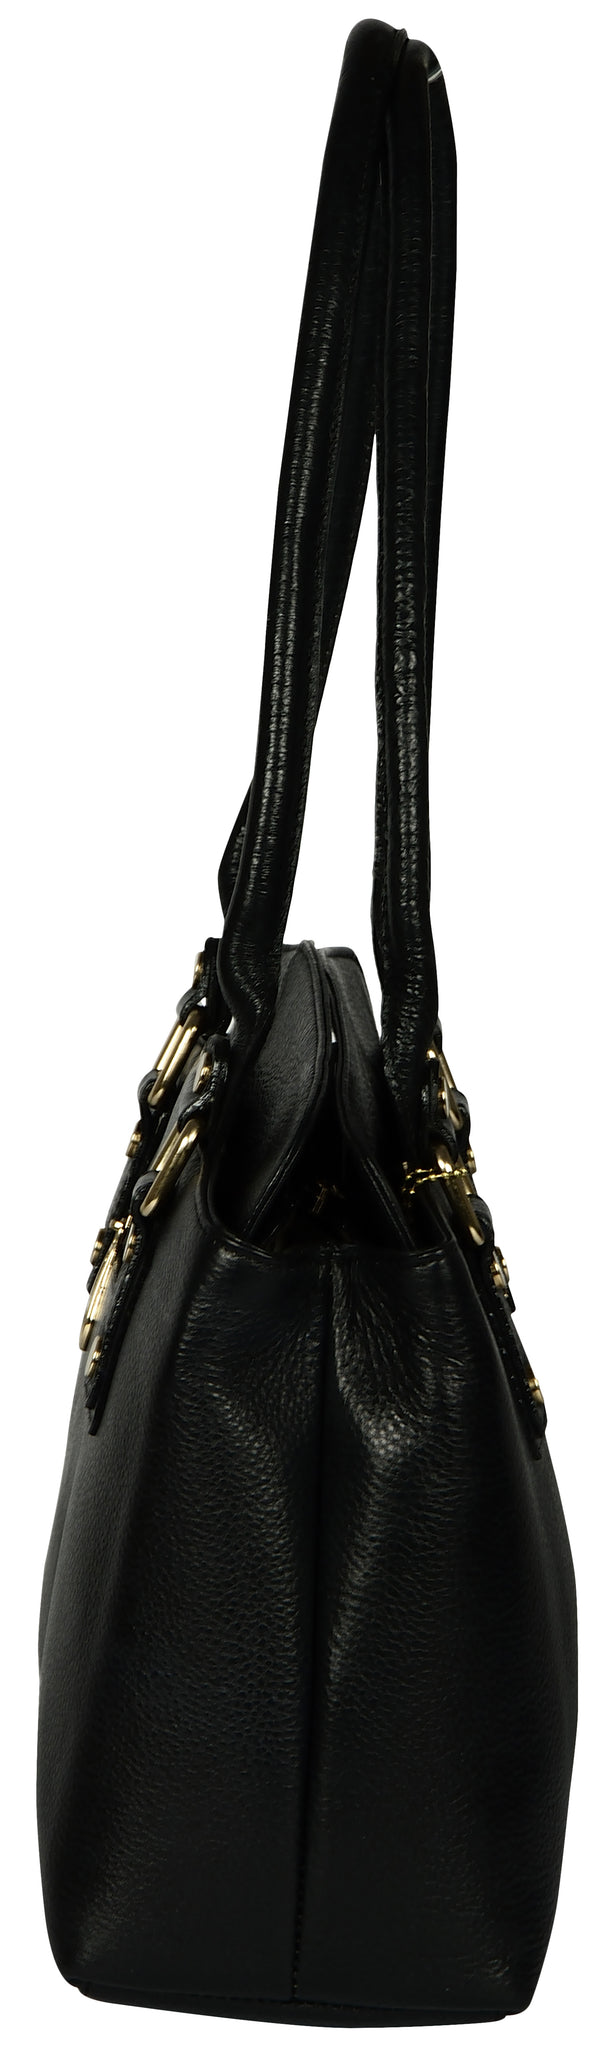 Women's solid black leather bag